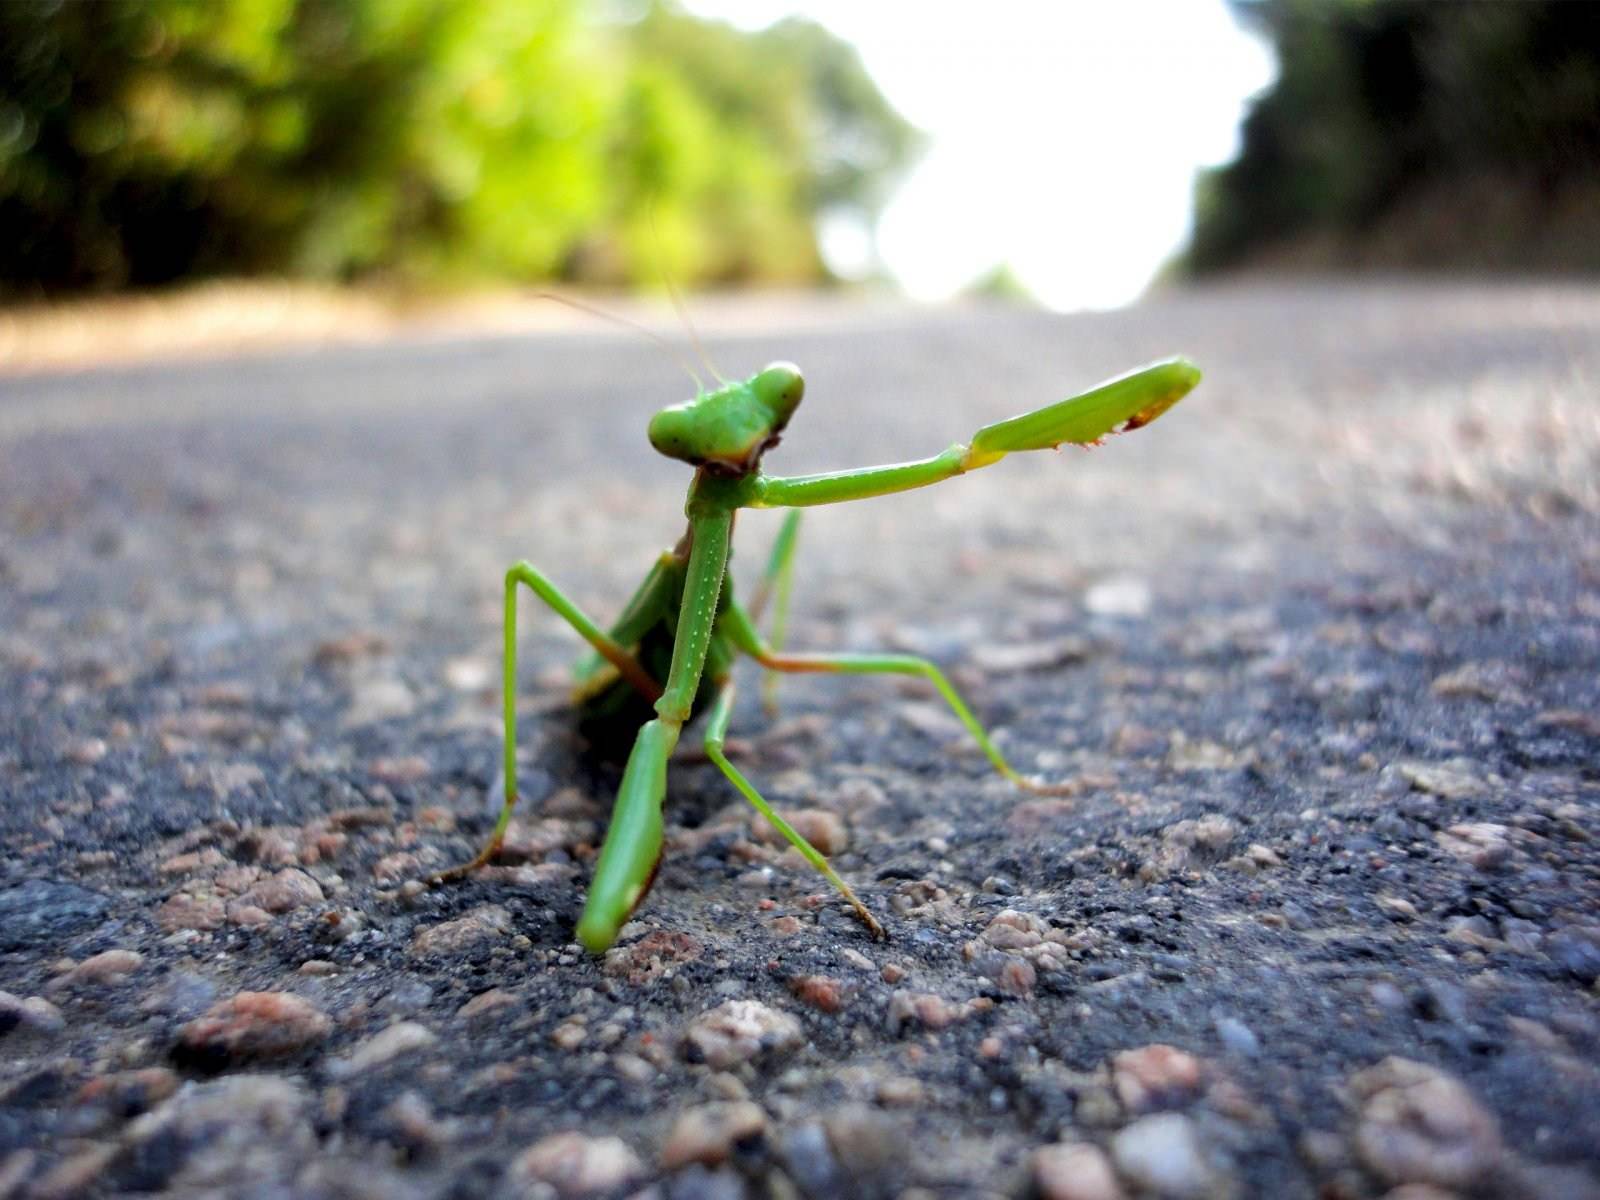 Mantes religieuses Guided by a praying mantis